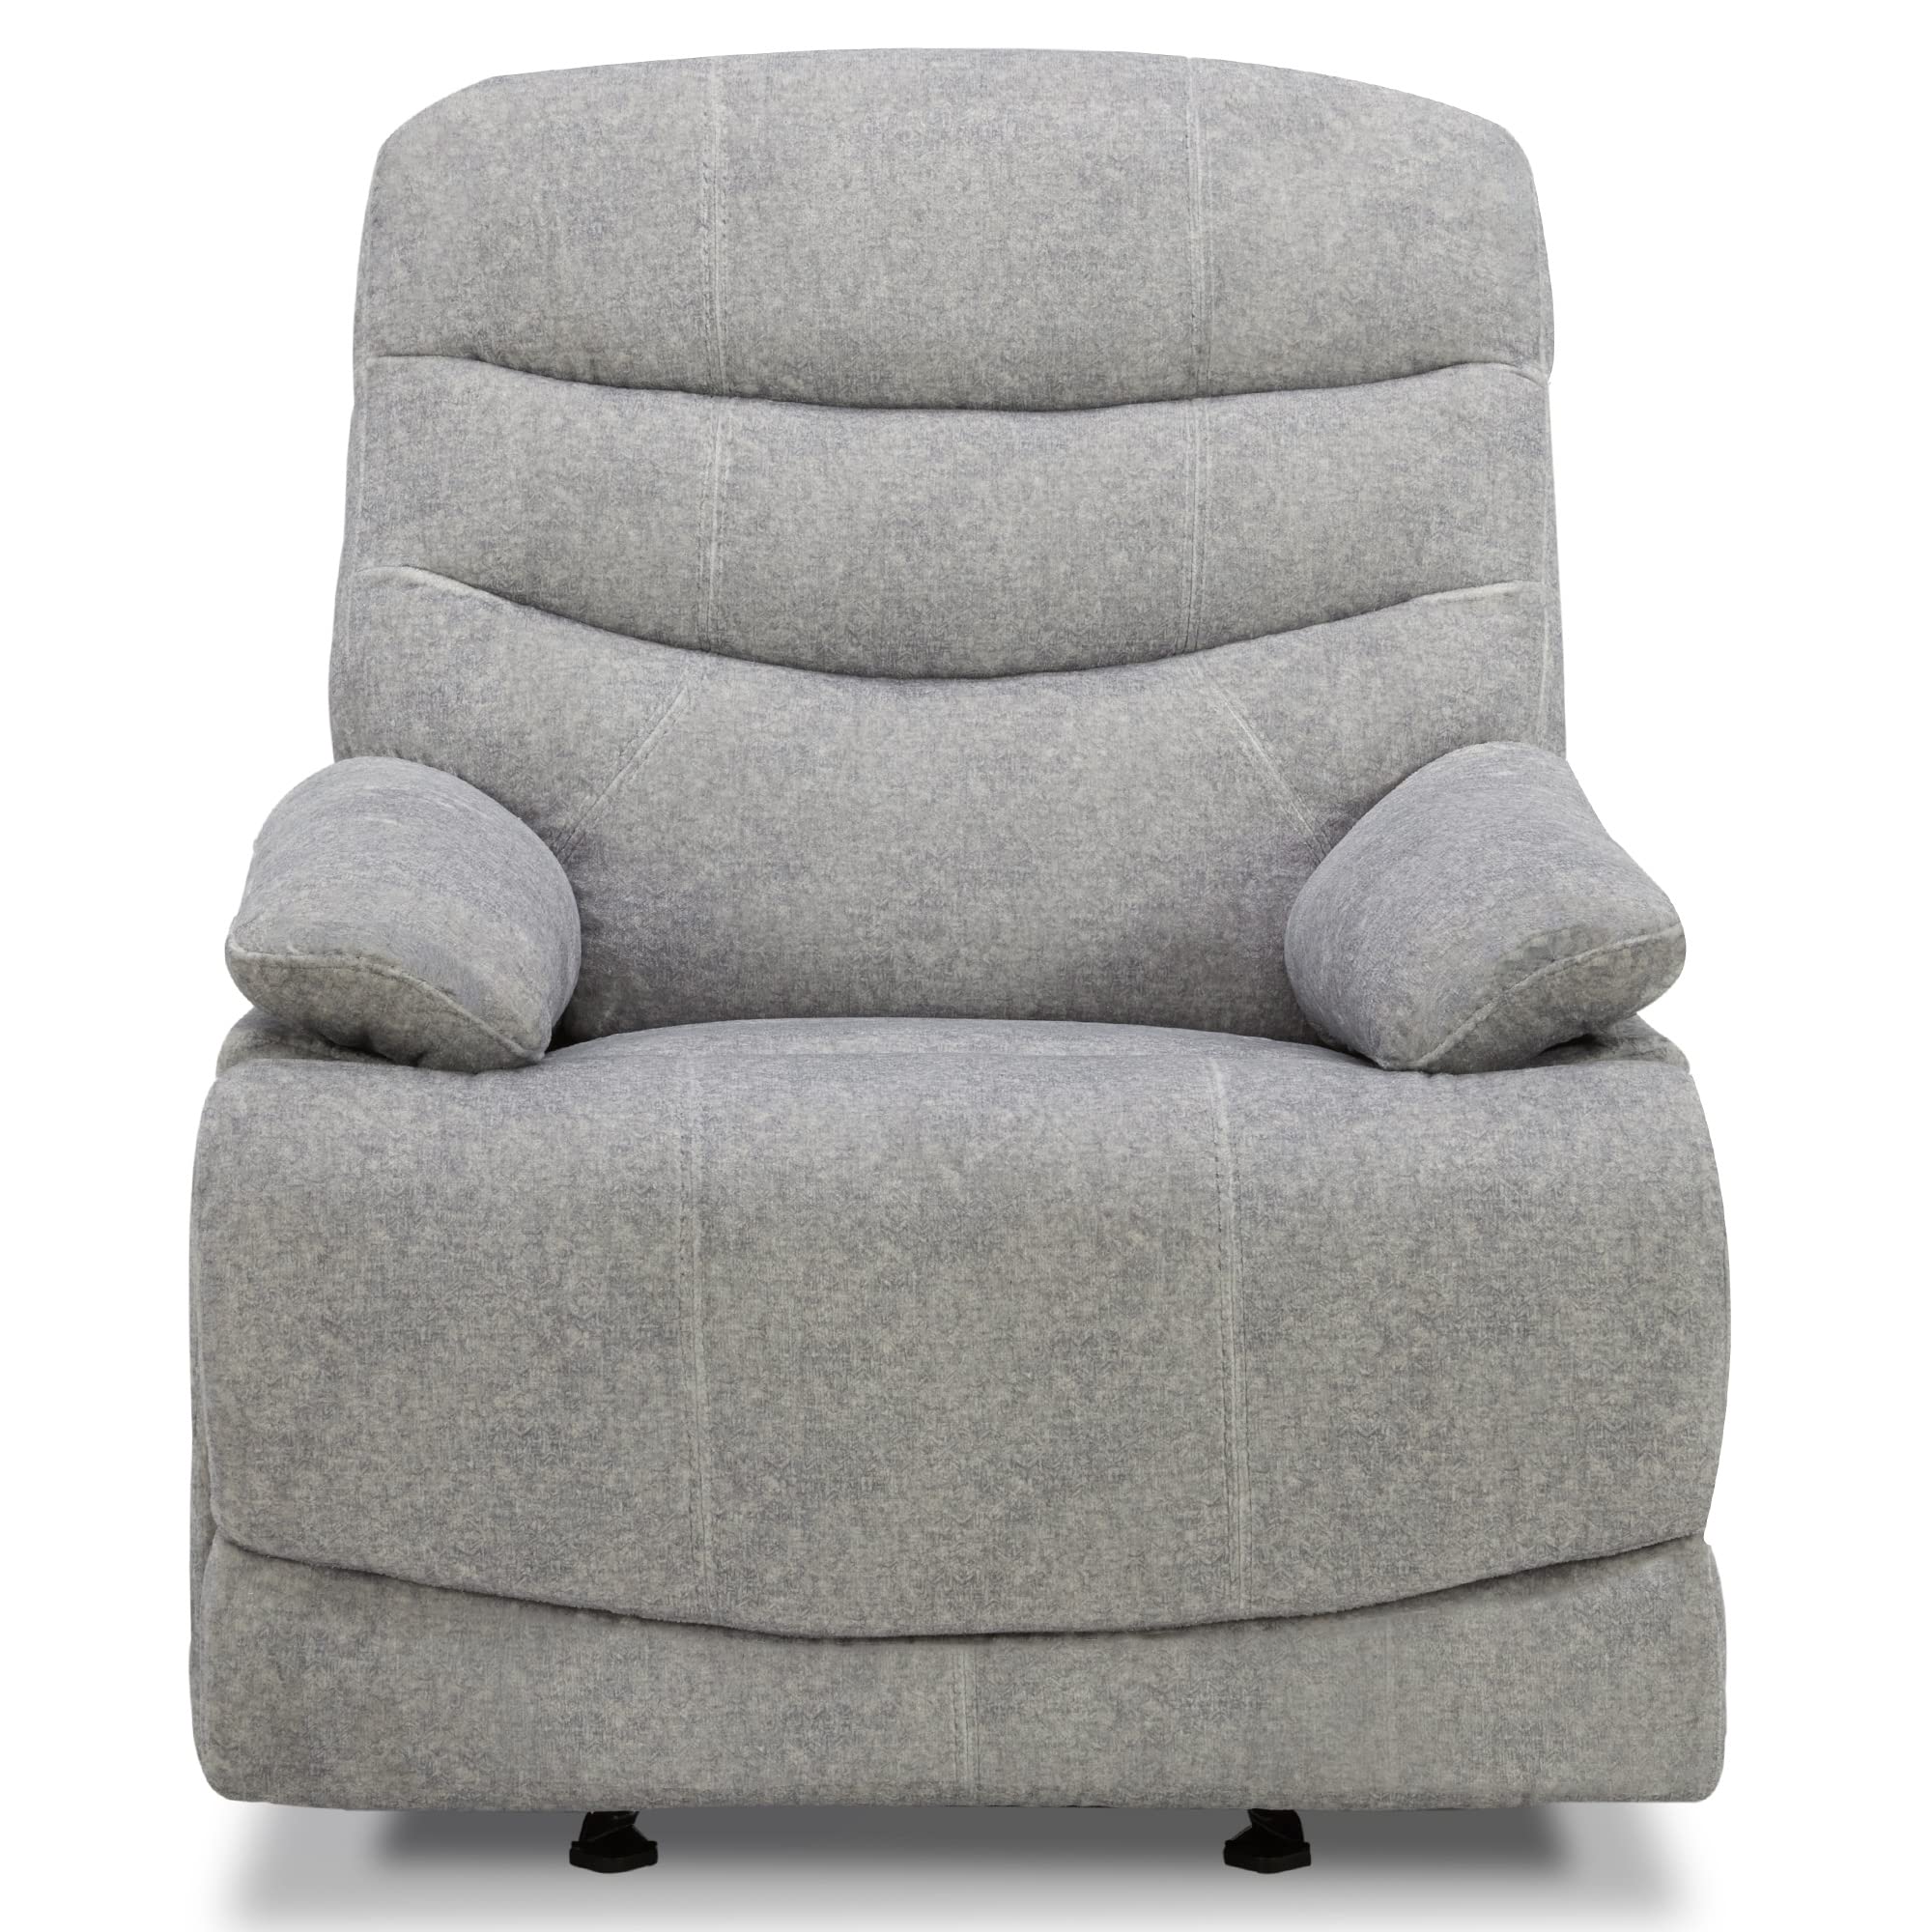 CHITA Power Recliner Chairs for Small Spaces, Glider Recliner Chair for Living Room with USB Charge Ports, Faux Fur, Light Grey